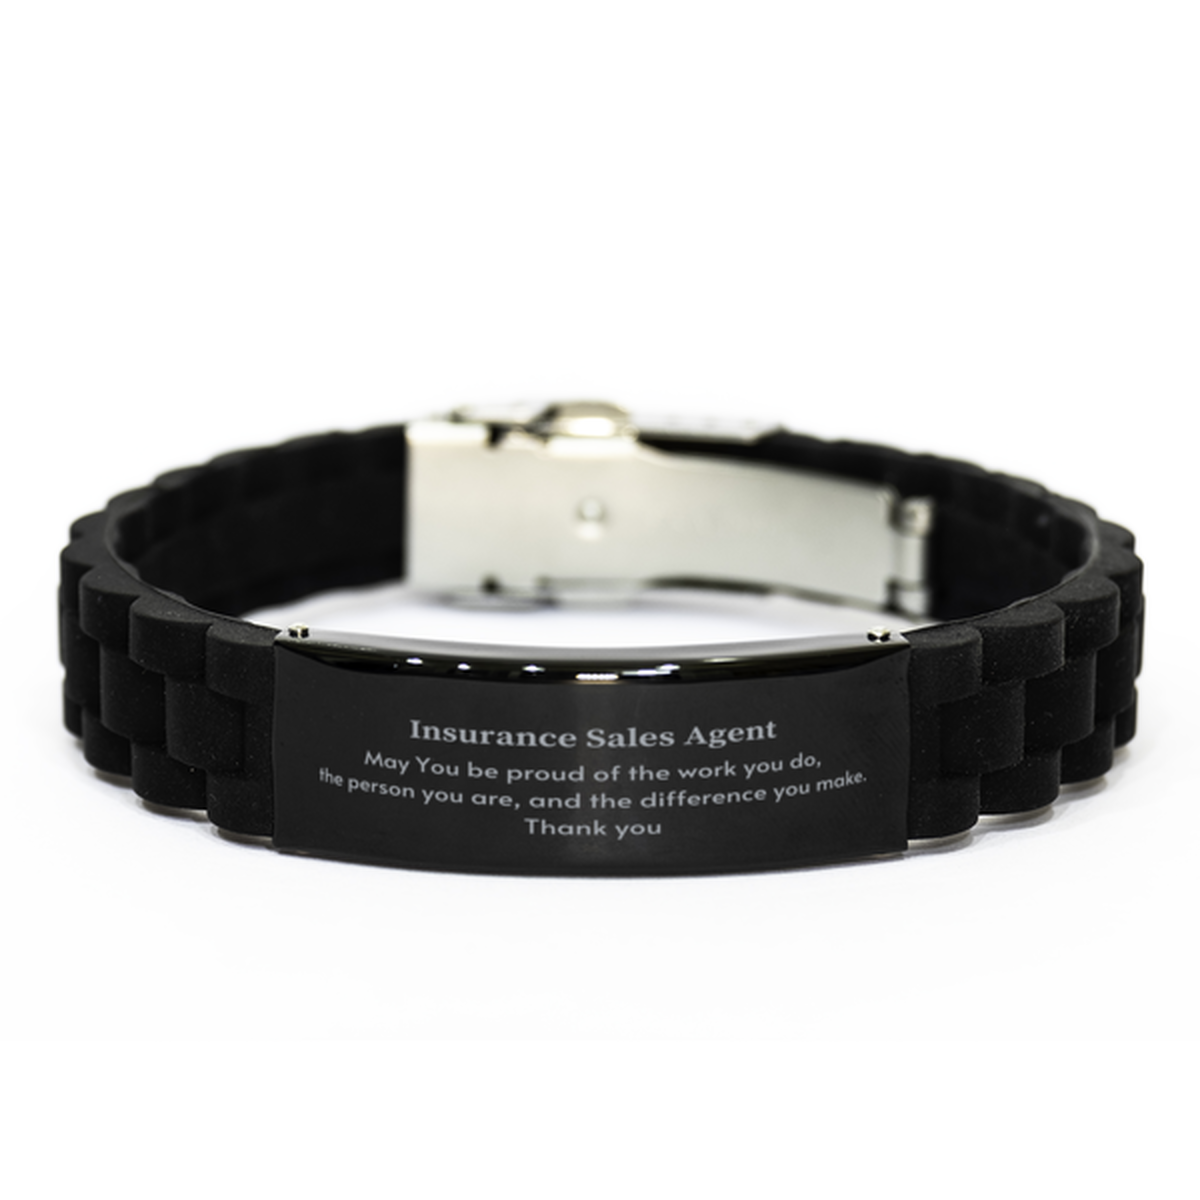 Heartwarming Black Glidelock Clasp Bracelet Retirement Coworkers Gifts for Insurance Sales Agent, Insurance Sales Agent May You be proud of the work you do, the person you are Gifts for Boss Men Women Friends